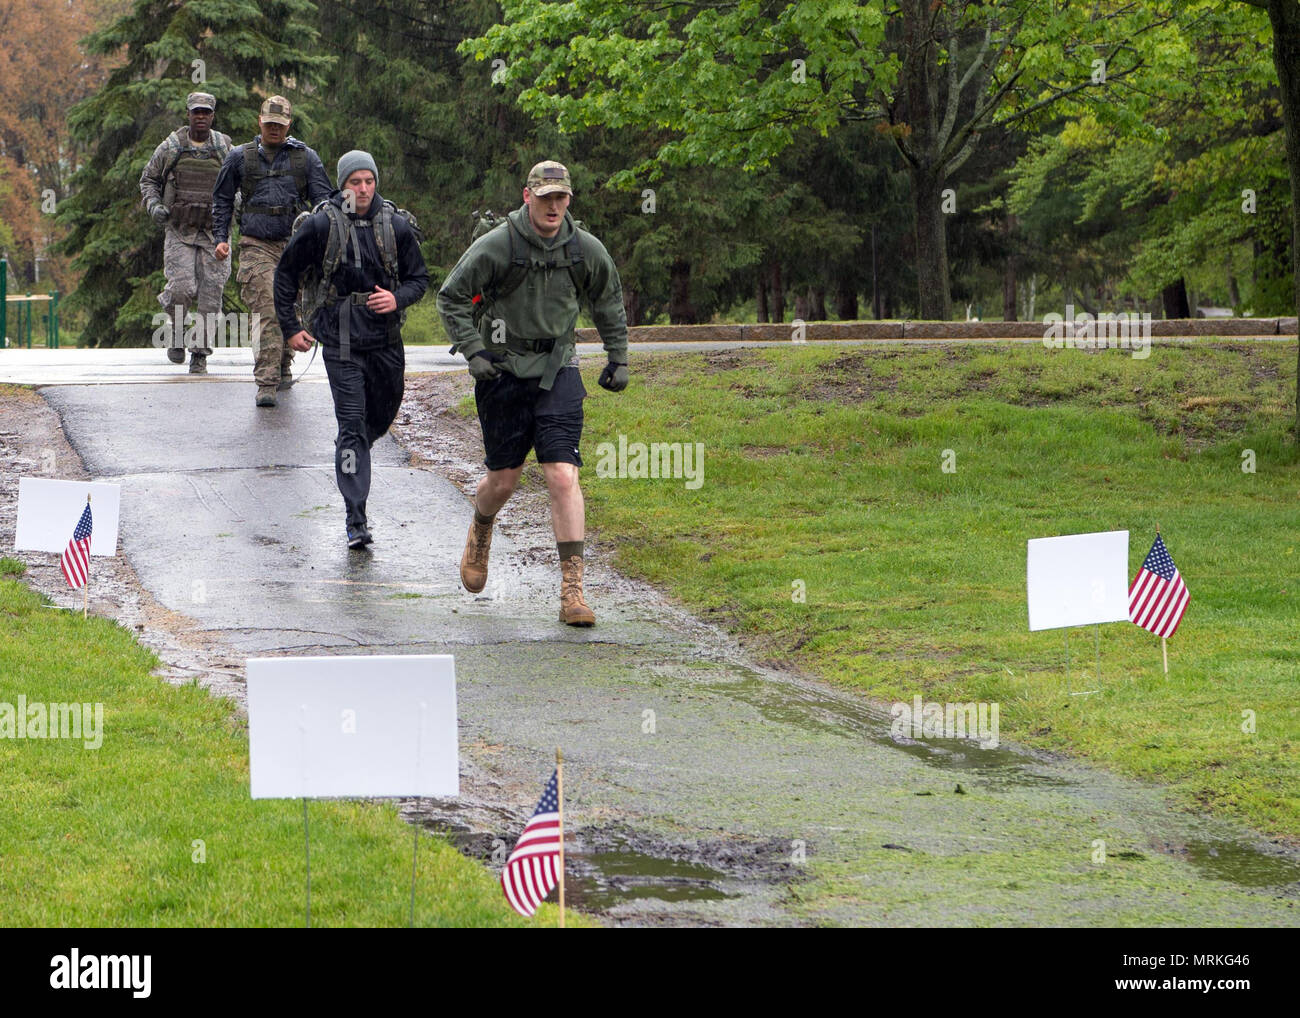 Staff Sgts. Daniel Fox, Andrew Pierce, Thorne Tayamen and Samuel Burke, all assigned to the 66th Security Forces Squadron, participate in a three-mile Air Force Office of Special Investigations Memorial Ruck March at Hanscom Air Force Base, Mass., May 15. The march was held as part of National Police Week, celebrated May 15 through 19, to pay special recognition to SFS and OSI personnel who have lost their lives in the line of duty for the safety and protection of others since 9/11. (U.S. Air Force photo by Jerry Saslav) Stock Photo